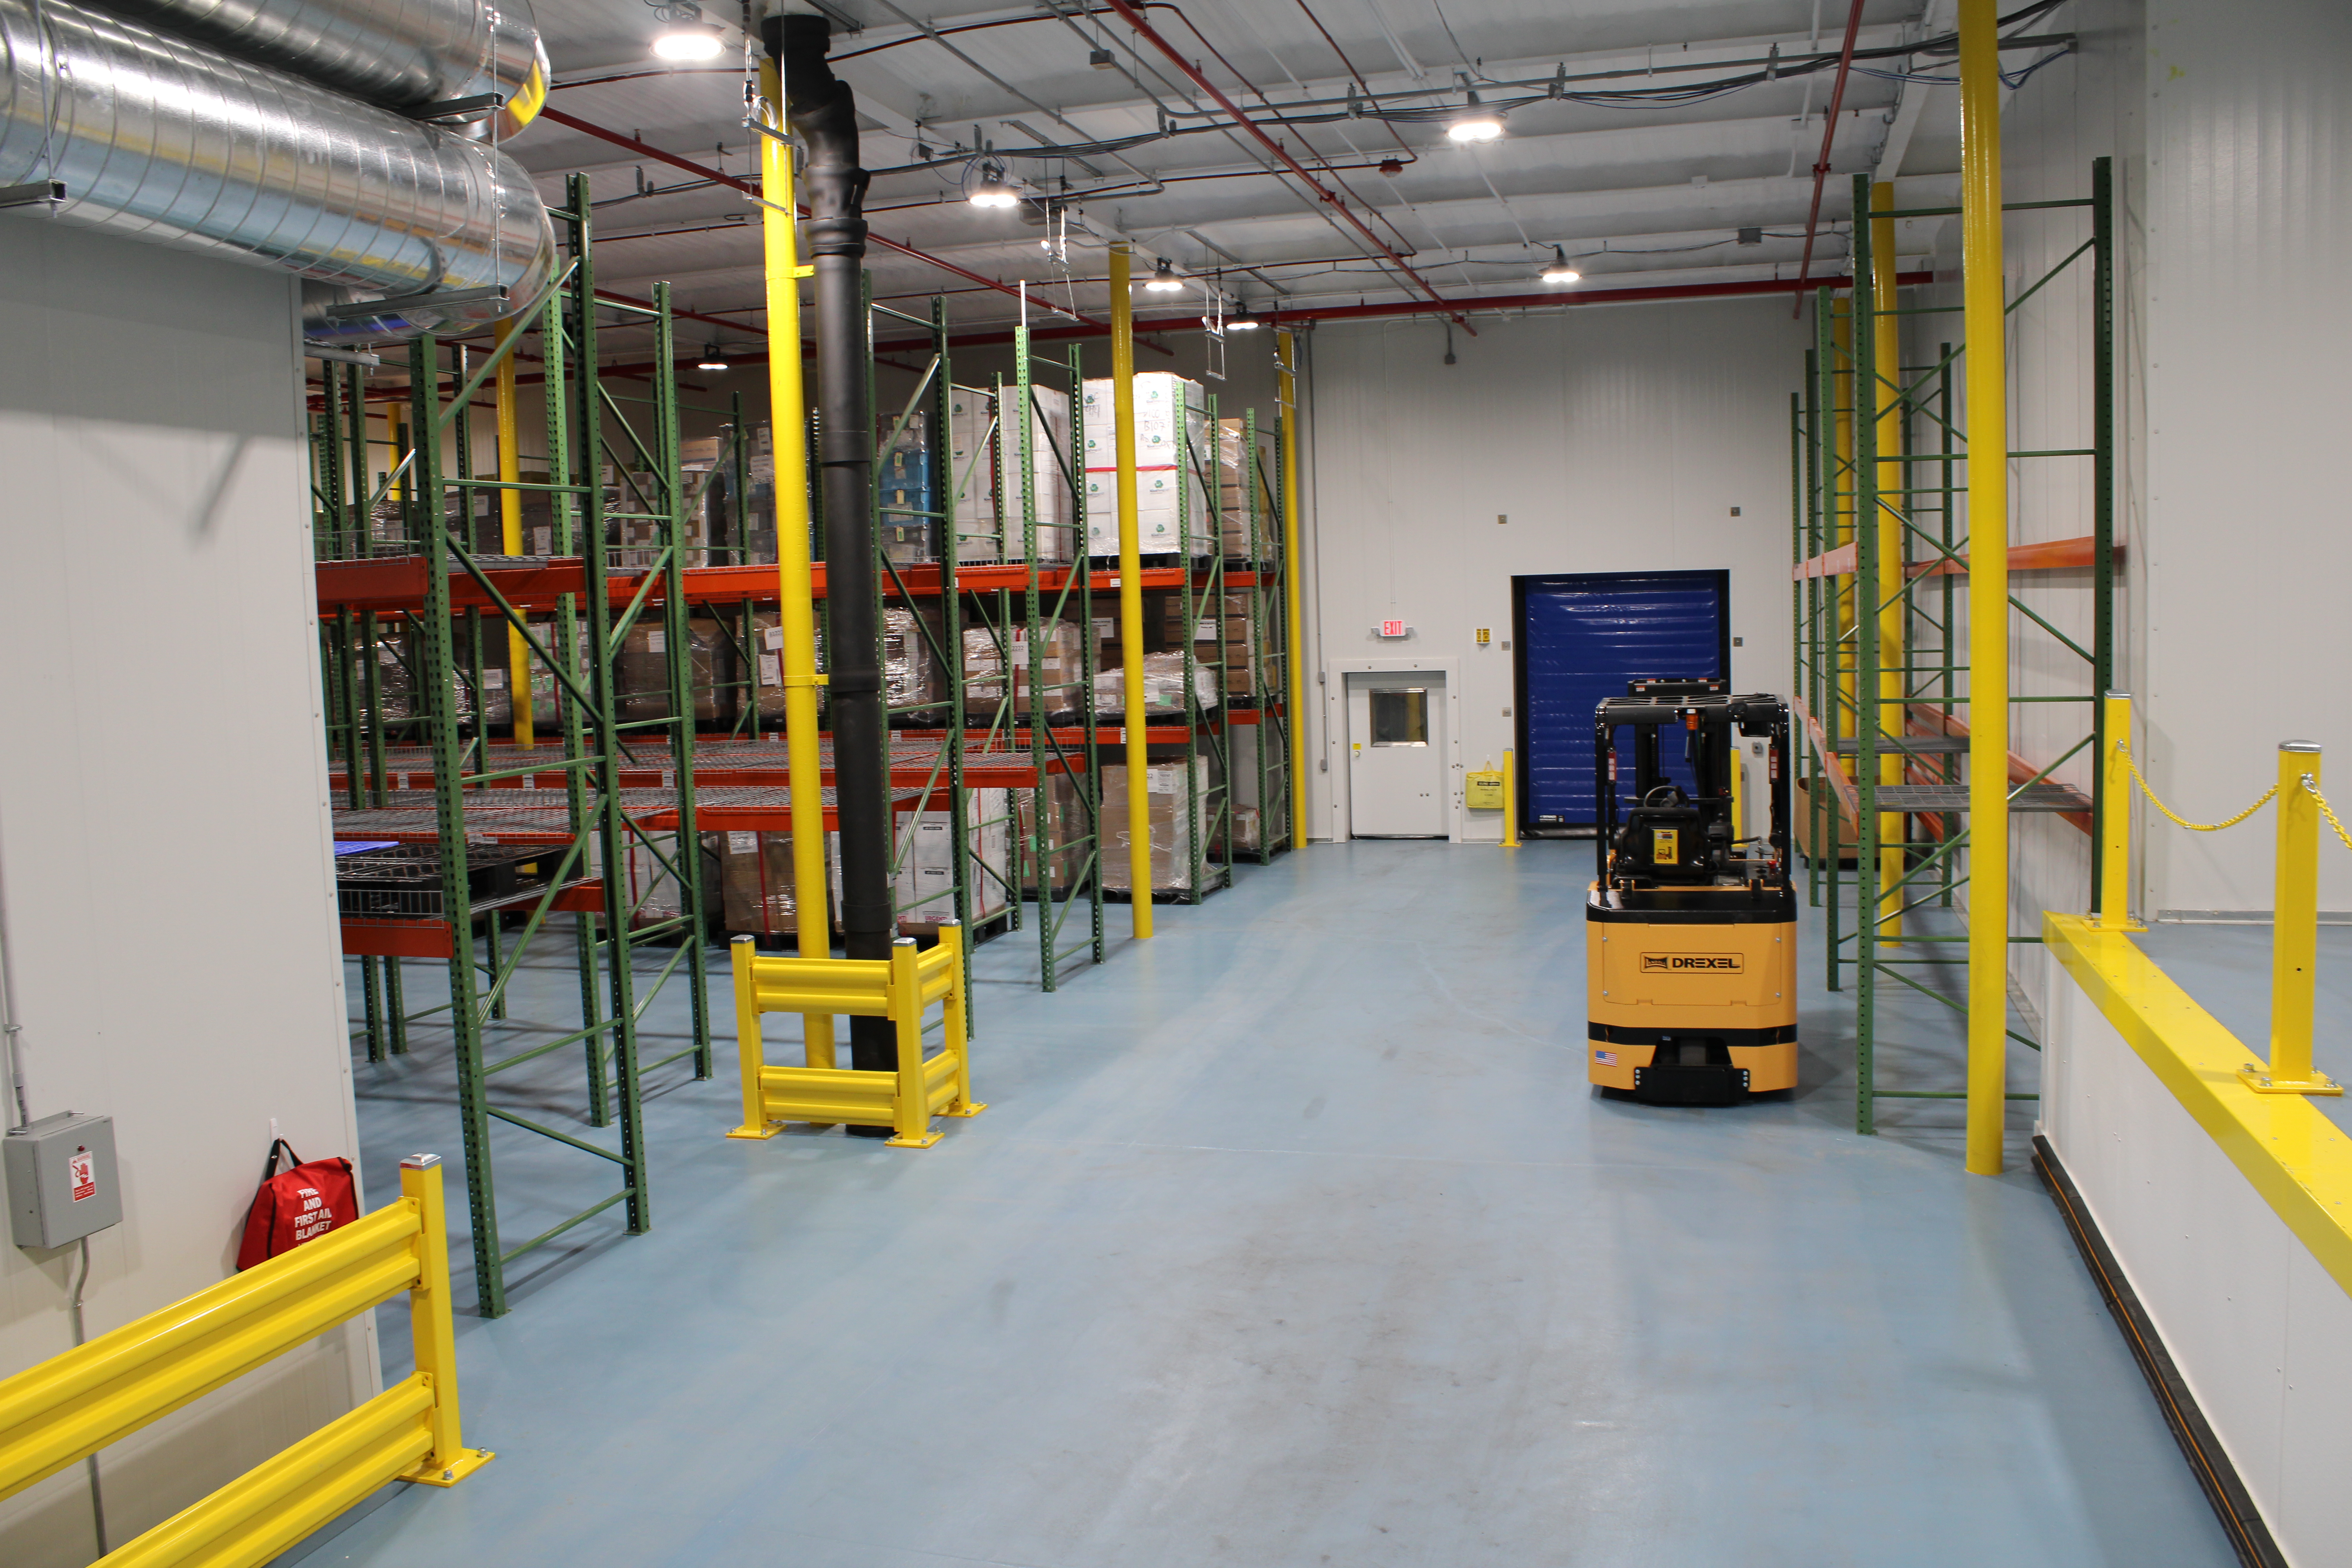 Customer Product Safety in the Warehouse